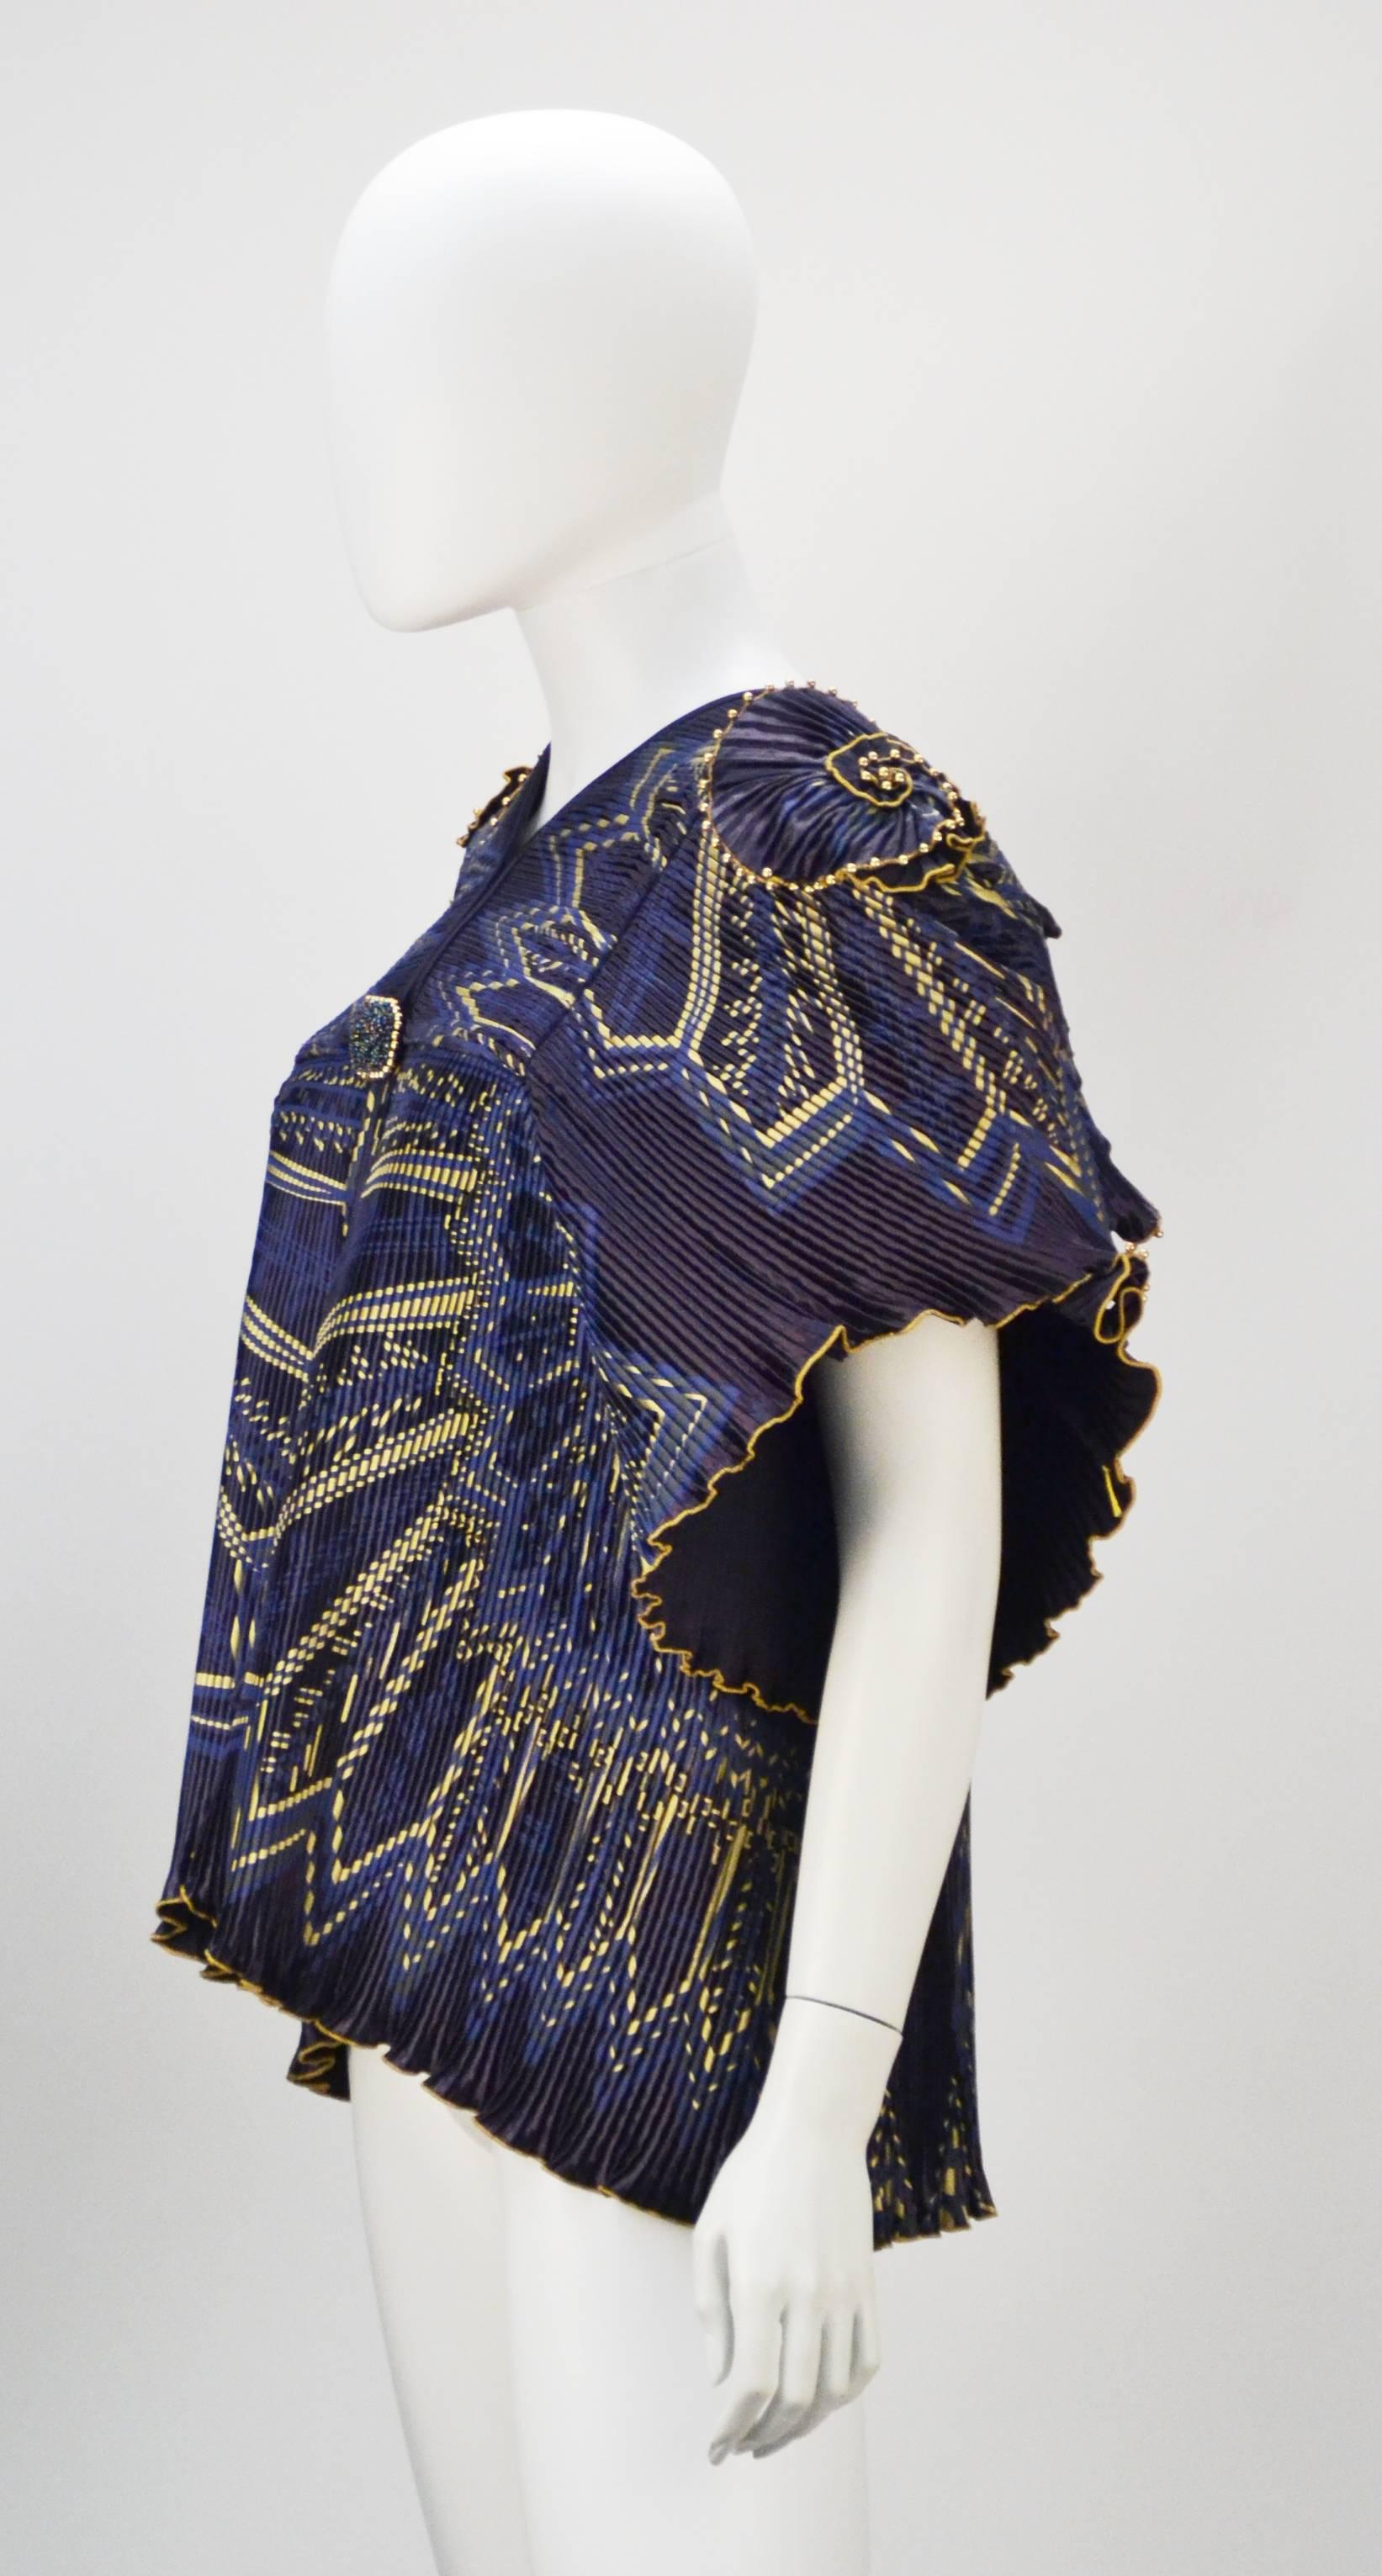 1970's Zandra Rhodes navy blue satin faced with gold dry print geometric print jacket. 100% rayon. The gorgeous statement piece features micro accordion pleating and a exquisite blue and gold pattern using one of her signature silk screening